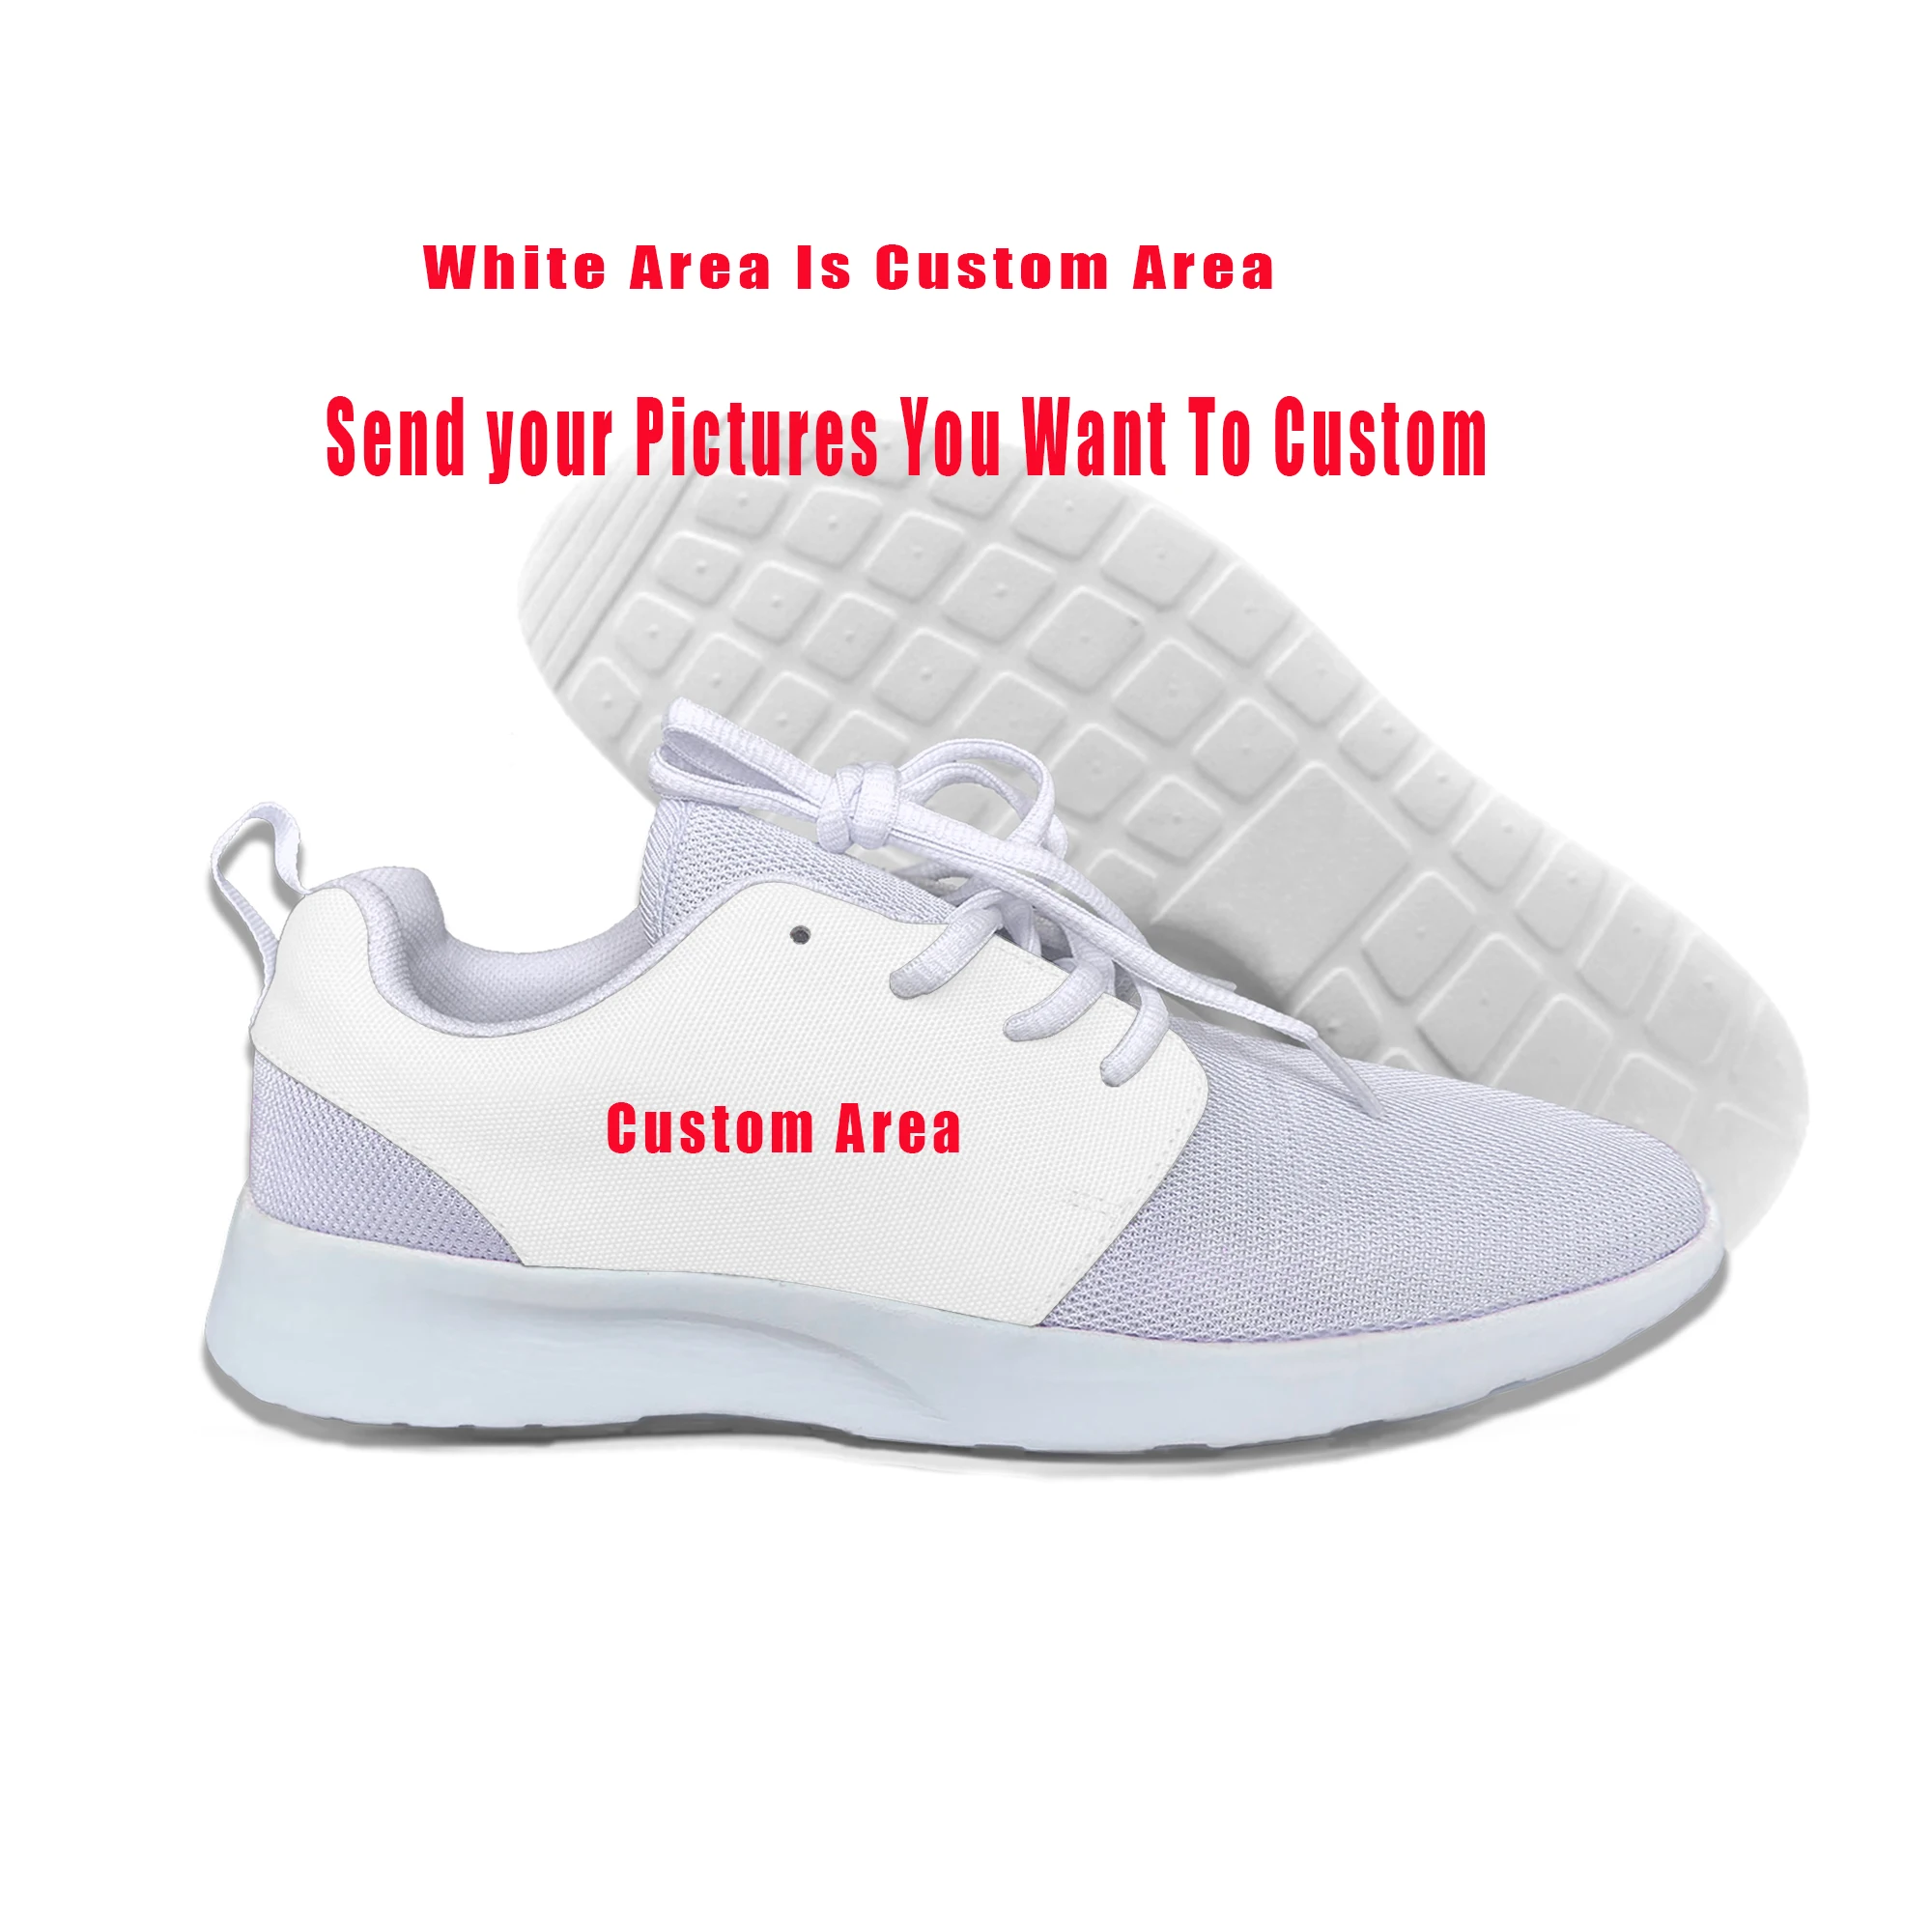 Hot Cool New Men Women Fashion Sweatshirt Selena Gomez Shoes Leisure Running Shoes Breathable Sports Shoes Classic Sneakers images - 6